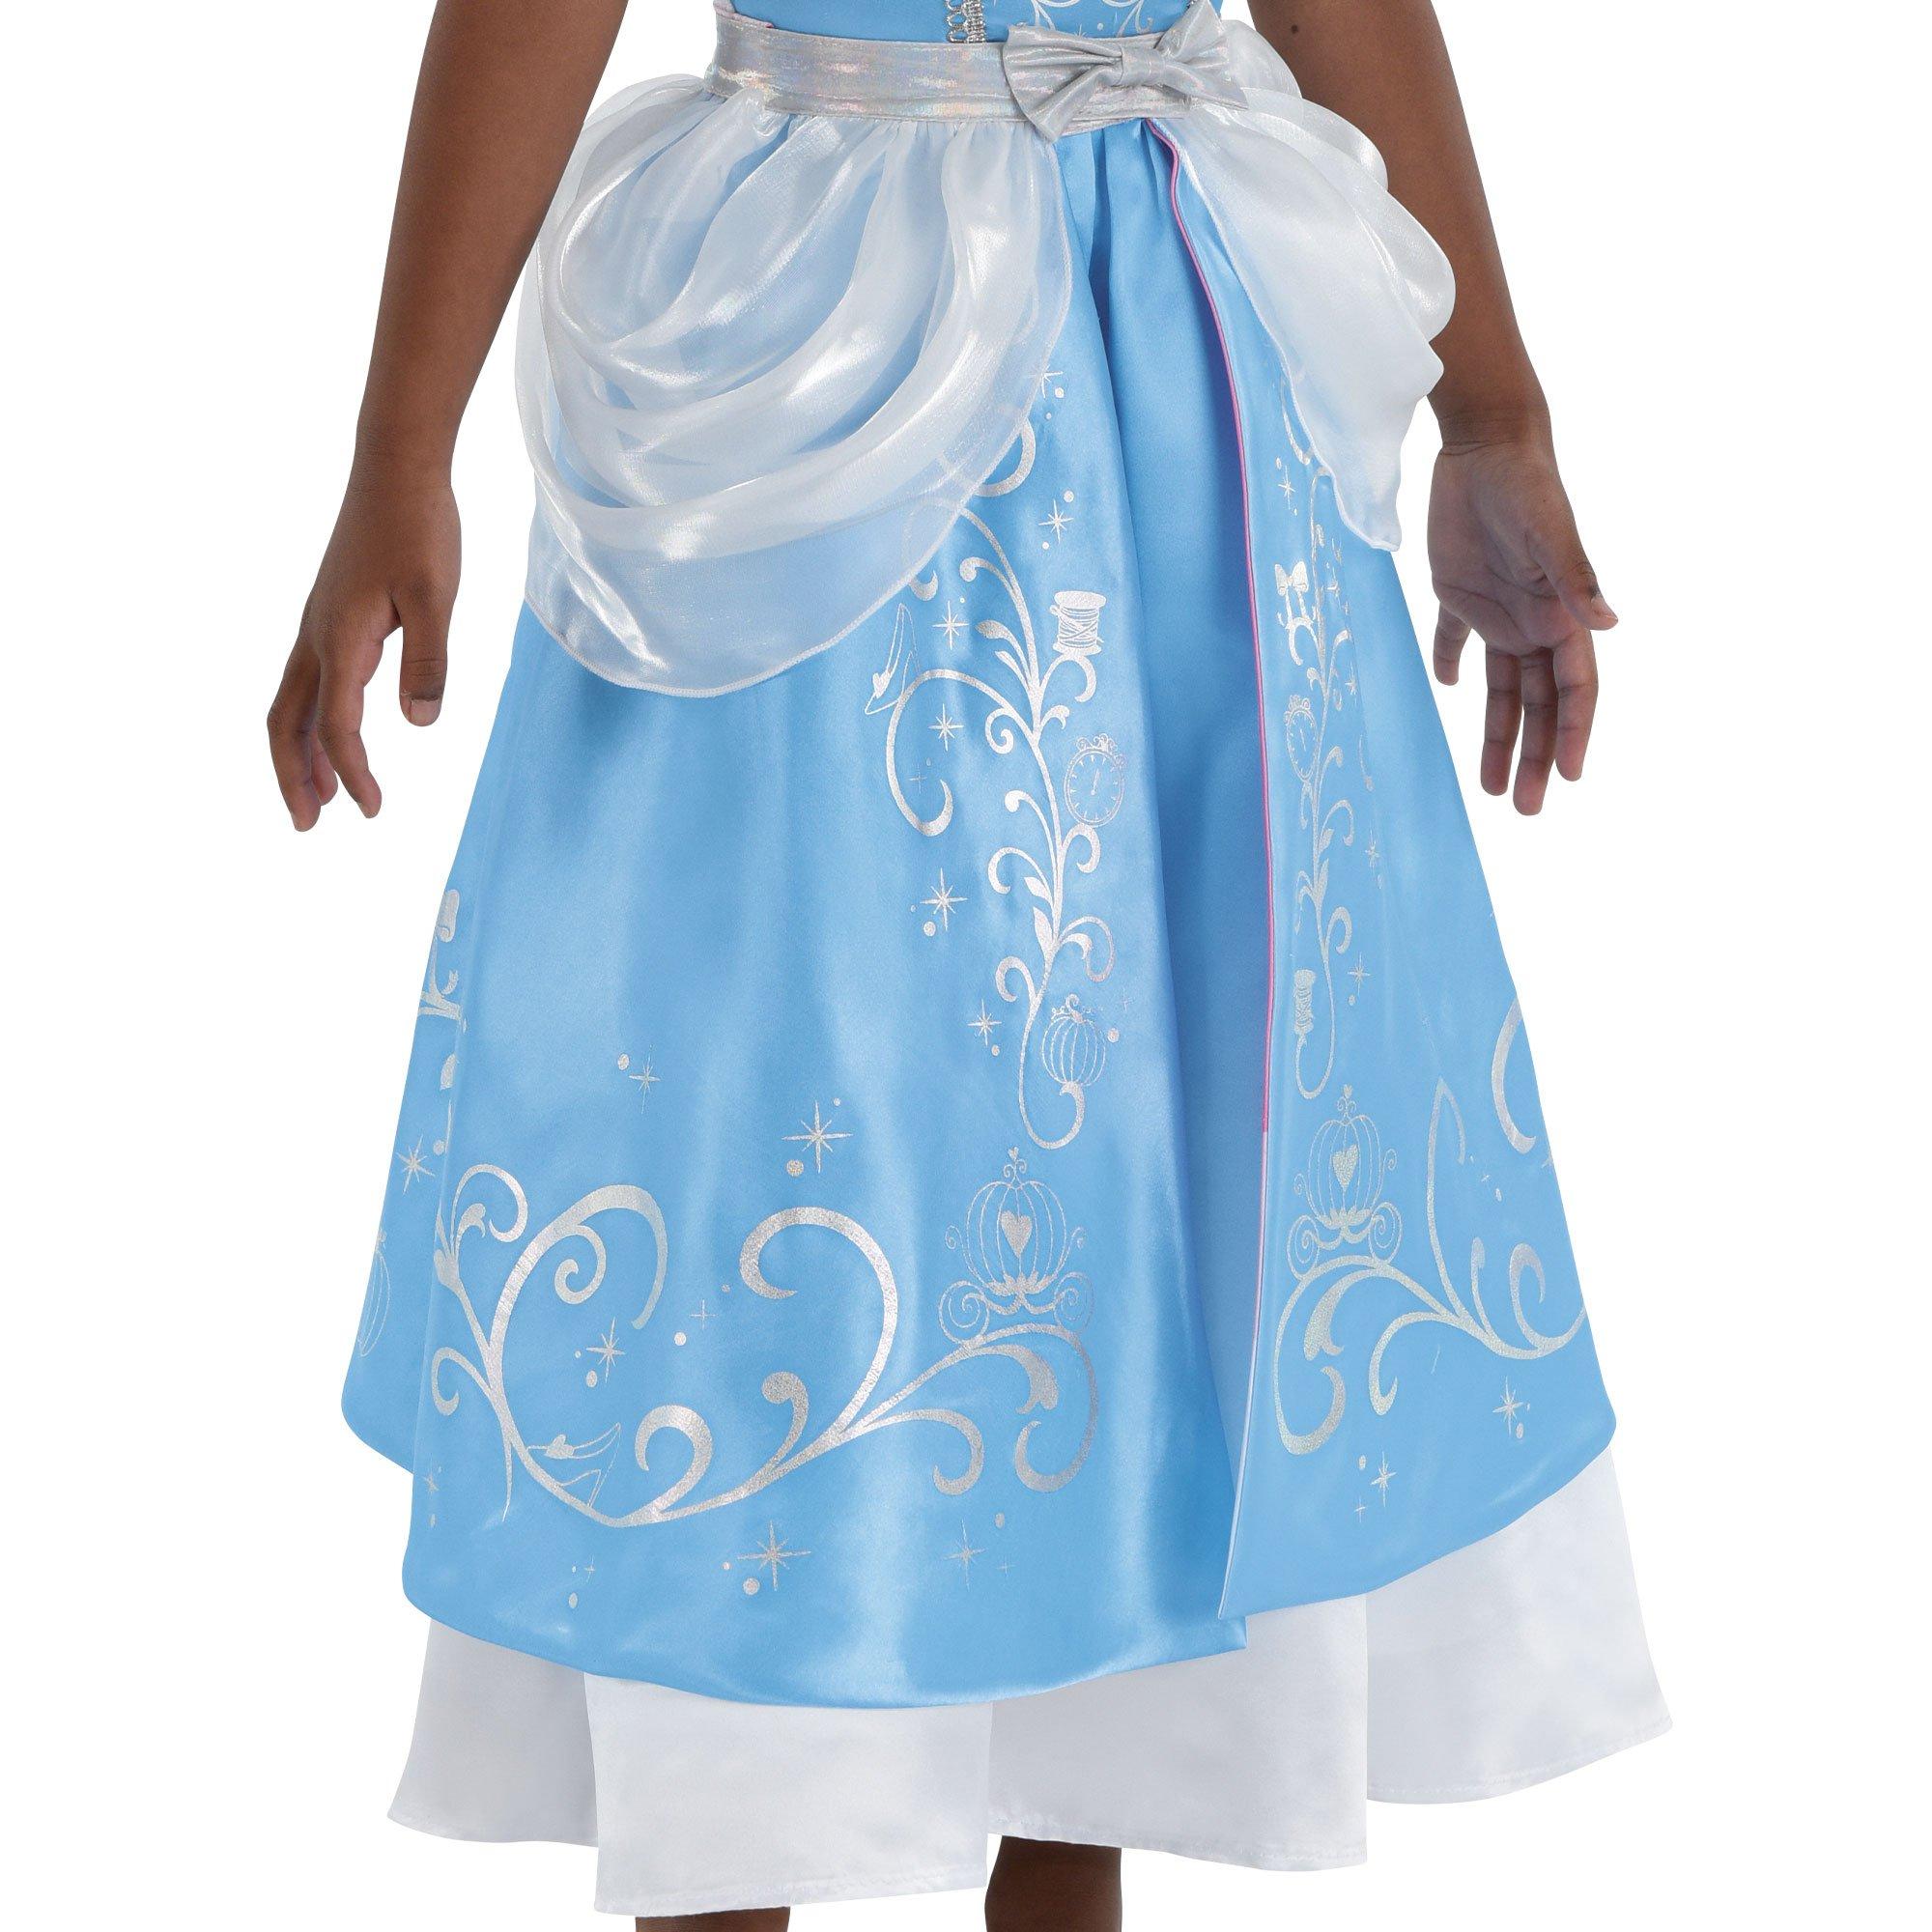 Little Girls Deluxe Cinderella Costume Puff Sleeve Layered Hallowen Party  Gown Children Fancy Birthday Princess Dress Up Clothes